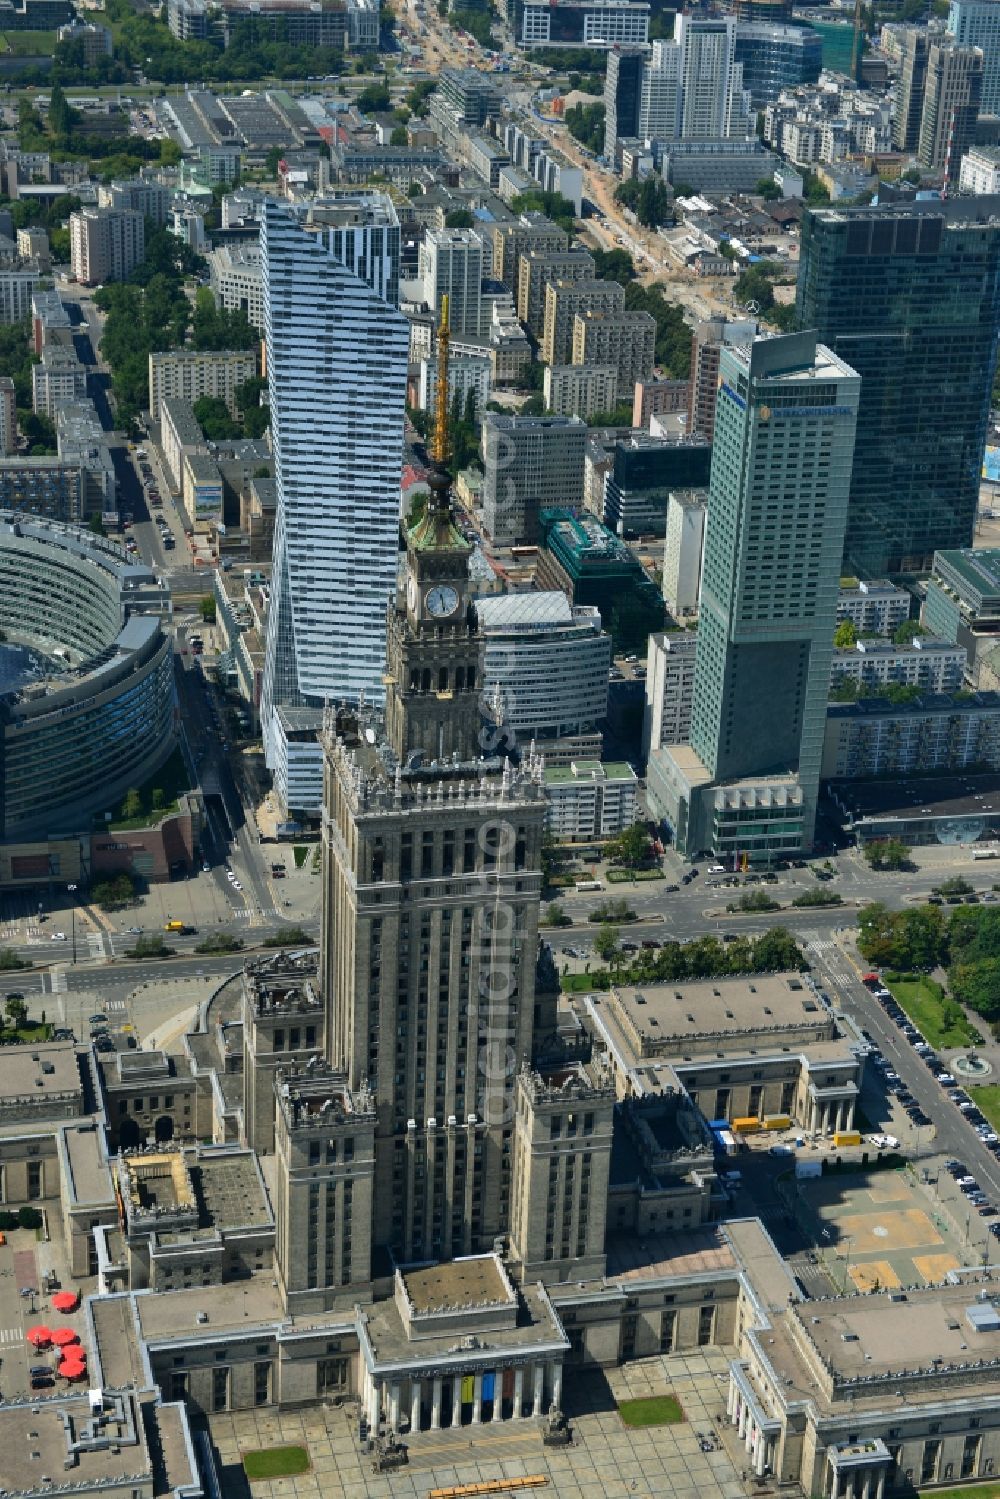 Warschau from the bird's eye view: View on the landmark in the city center, the high-rise building complex of the Palace of Culture and Science (Palac Kultury i Nauki Polish) in Warsaw in Poland